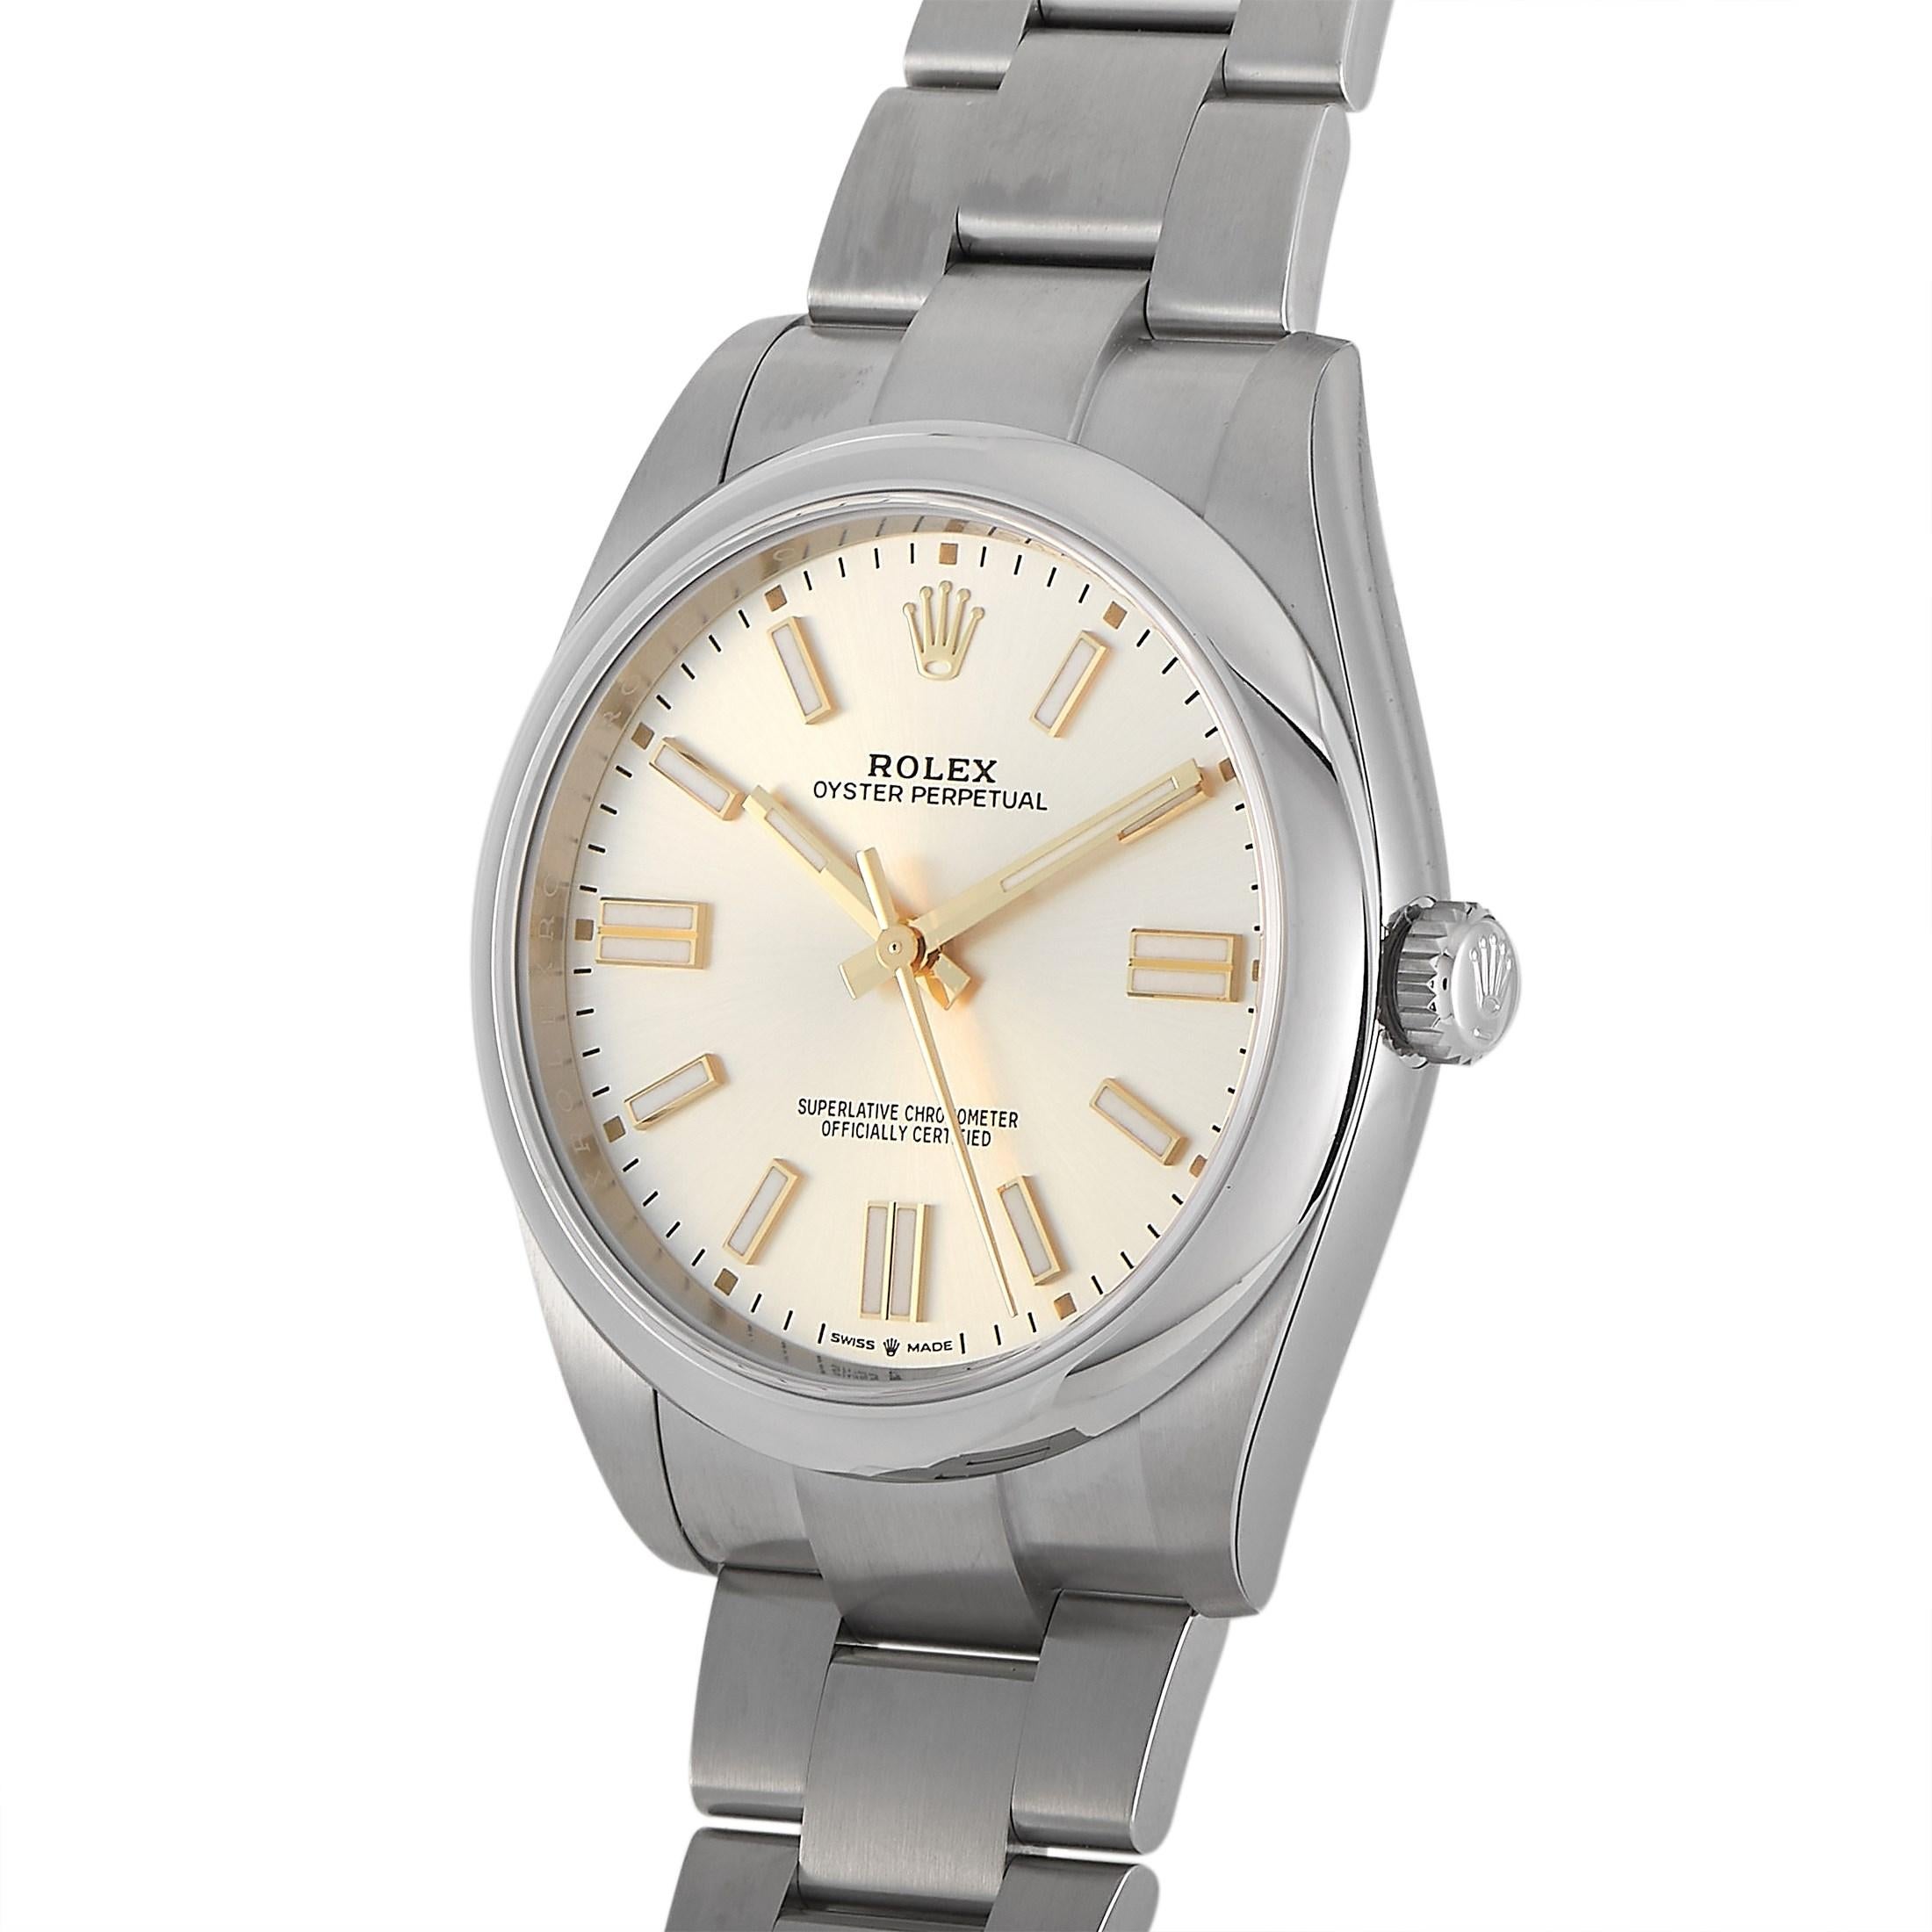 The Rolex Oyster Perpetual Watch, reference number 124300, is a shining example of the luxury brand’s commitment to excellence. 

This timeless design features a 41mm case and bracelet crafted from shimmering stainless steel. On the simple silver